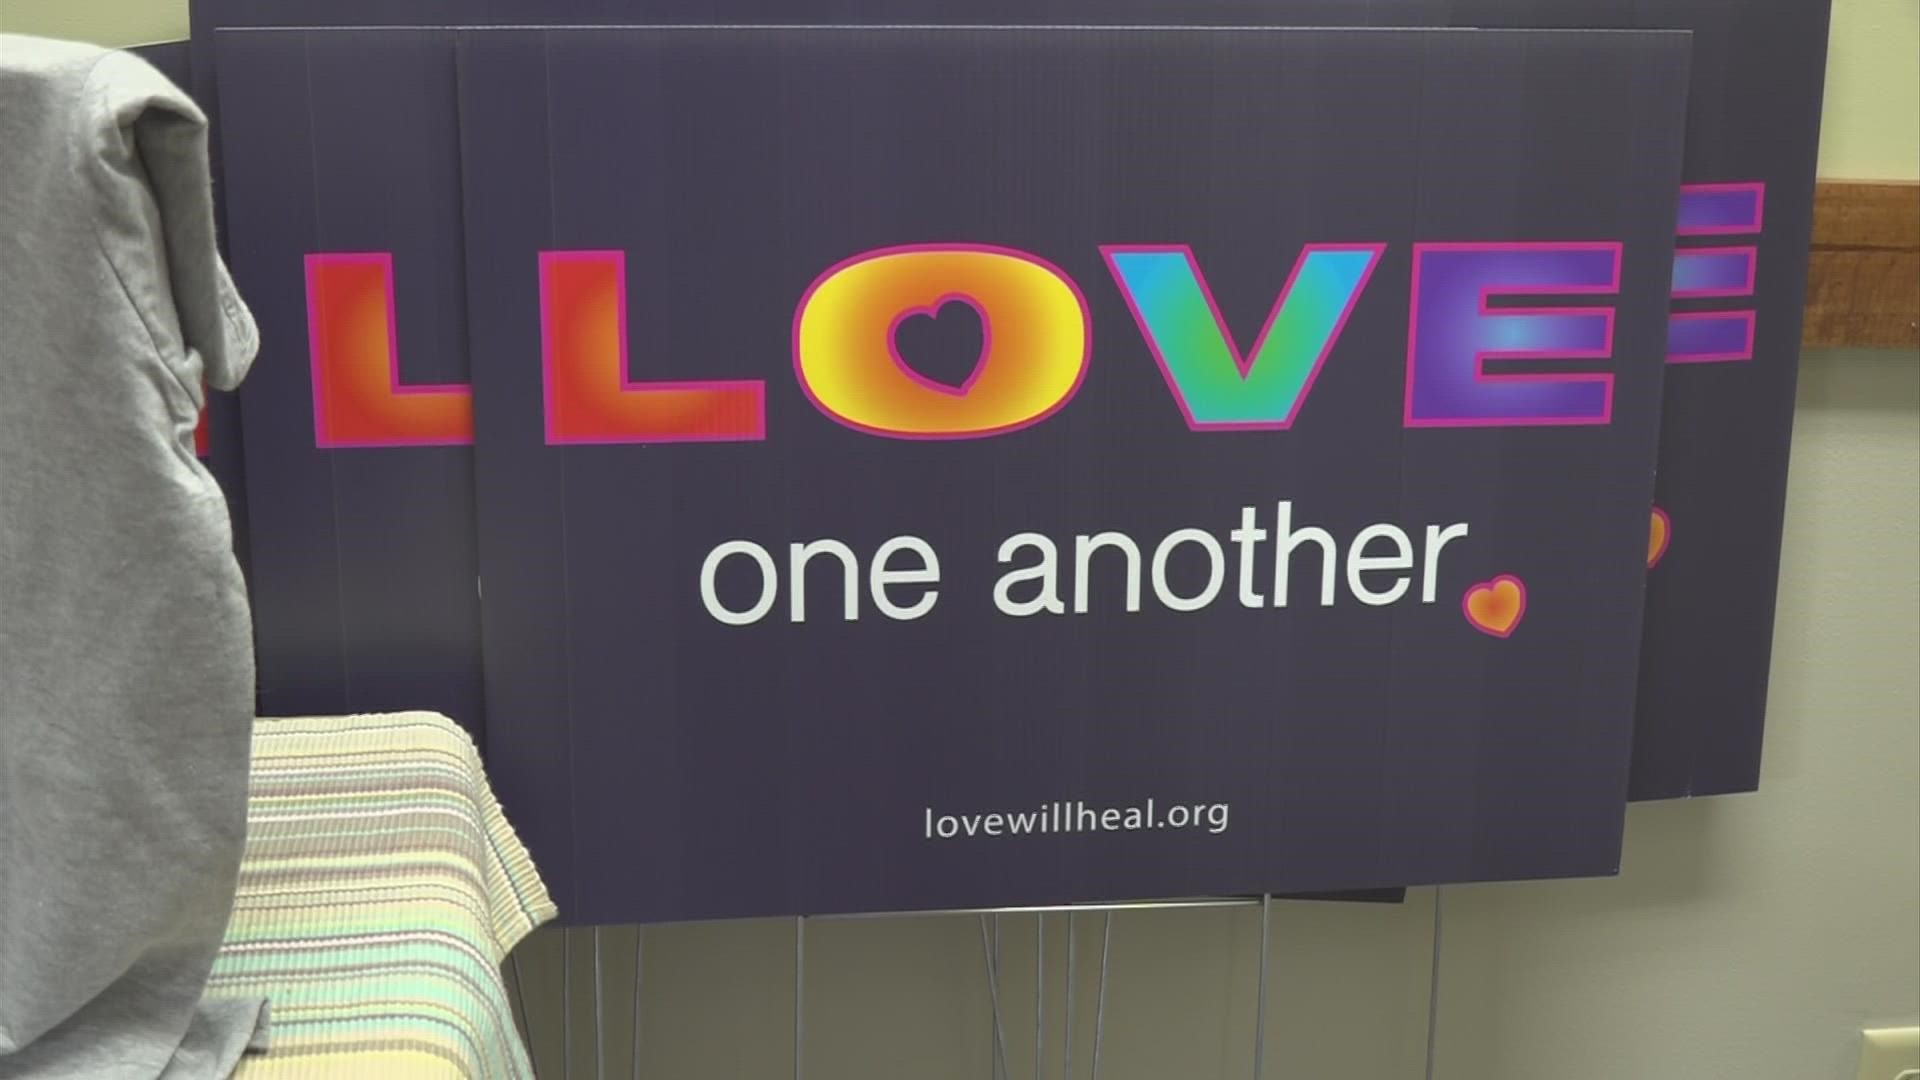 Lea Ann Maceyko got tired of hearing the anger, frustration and division. So, she started a nonprofit to combat the negativity, telling people to love one another.